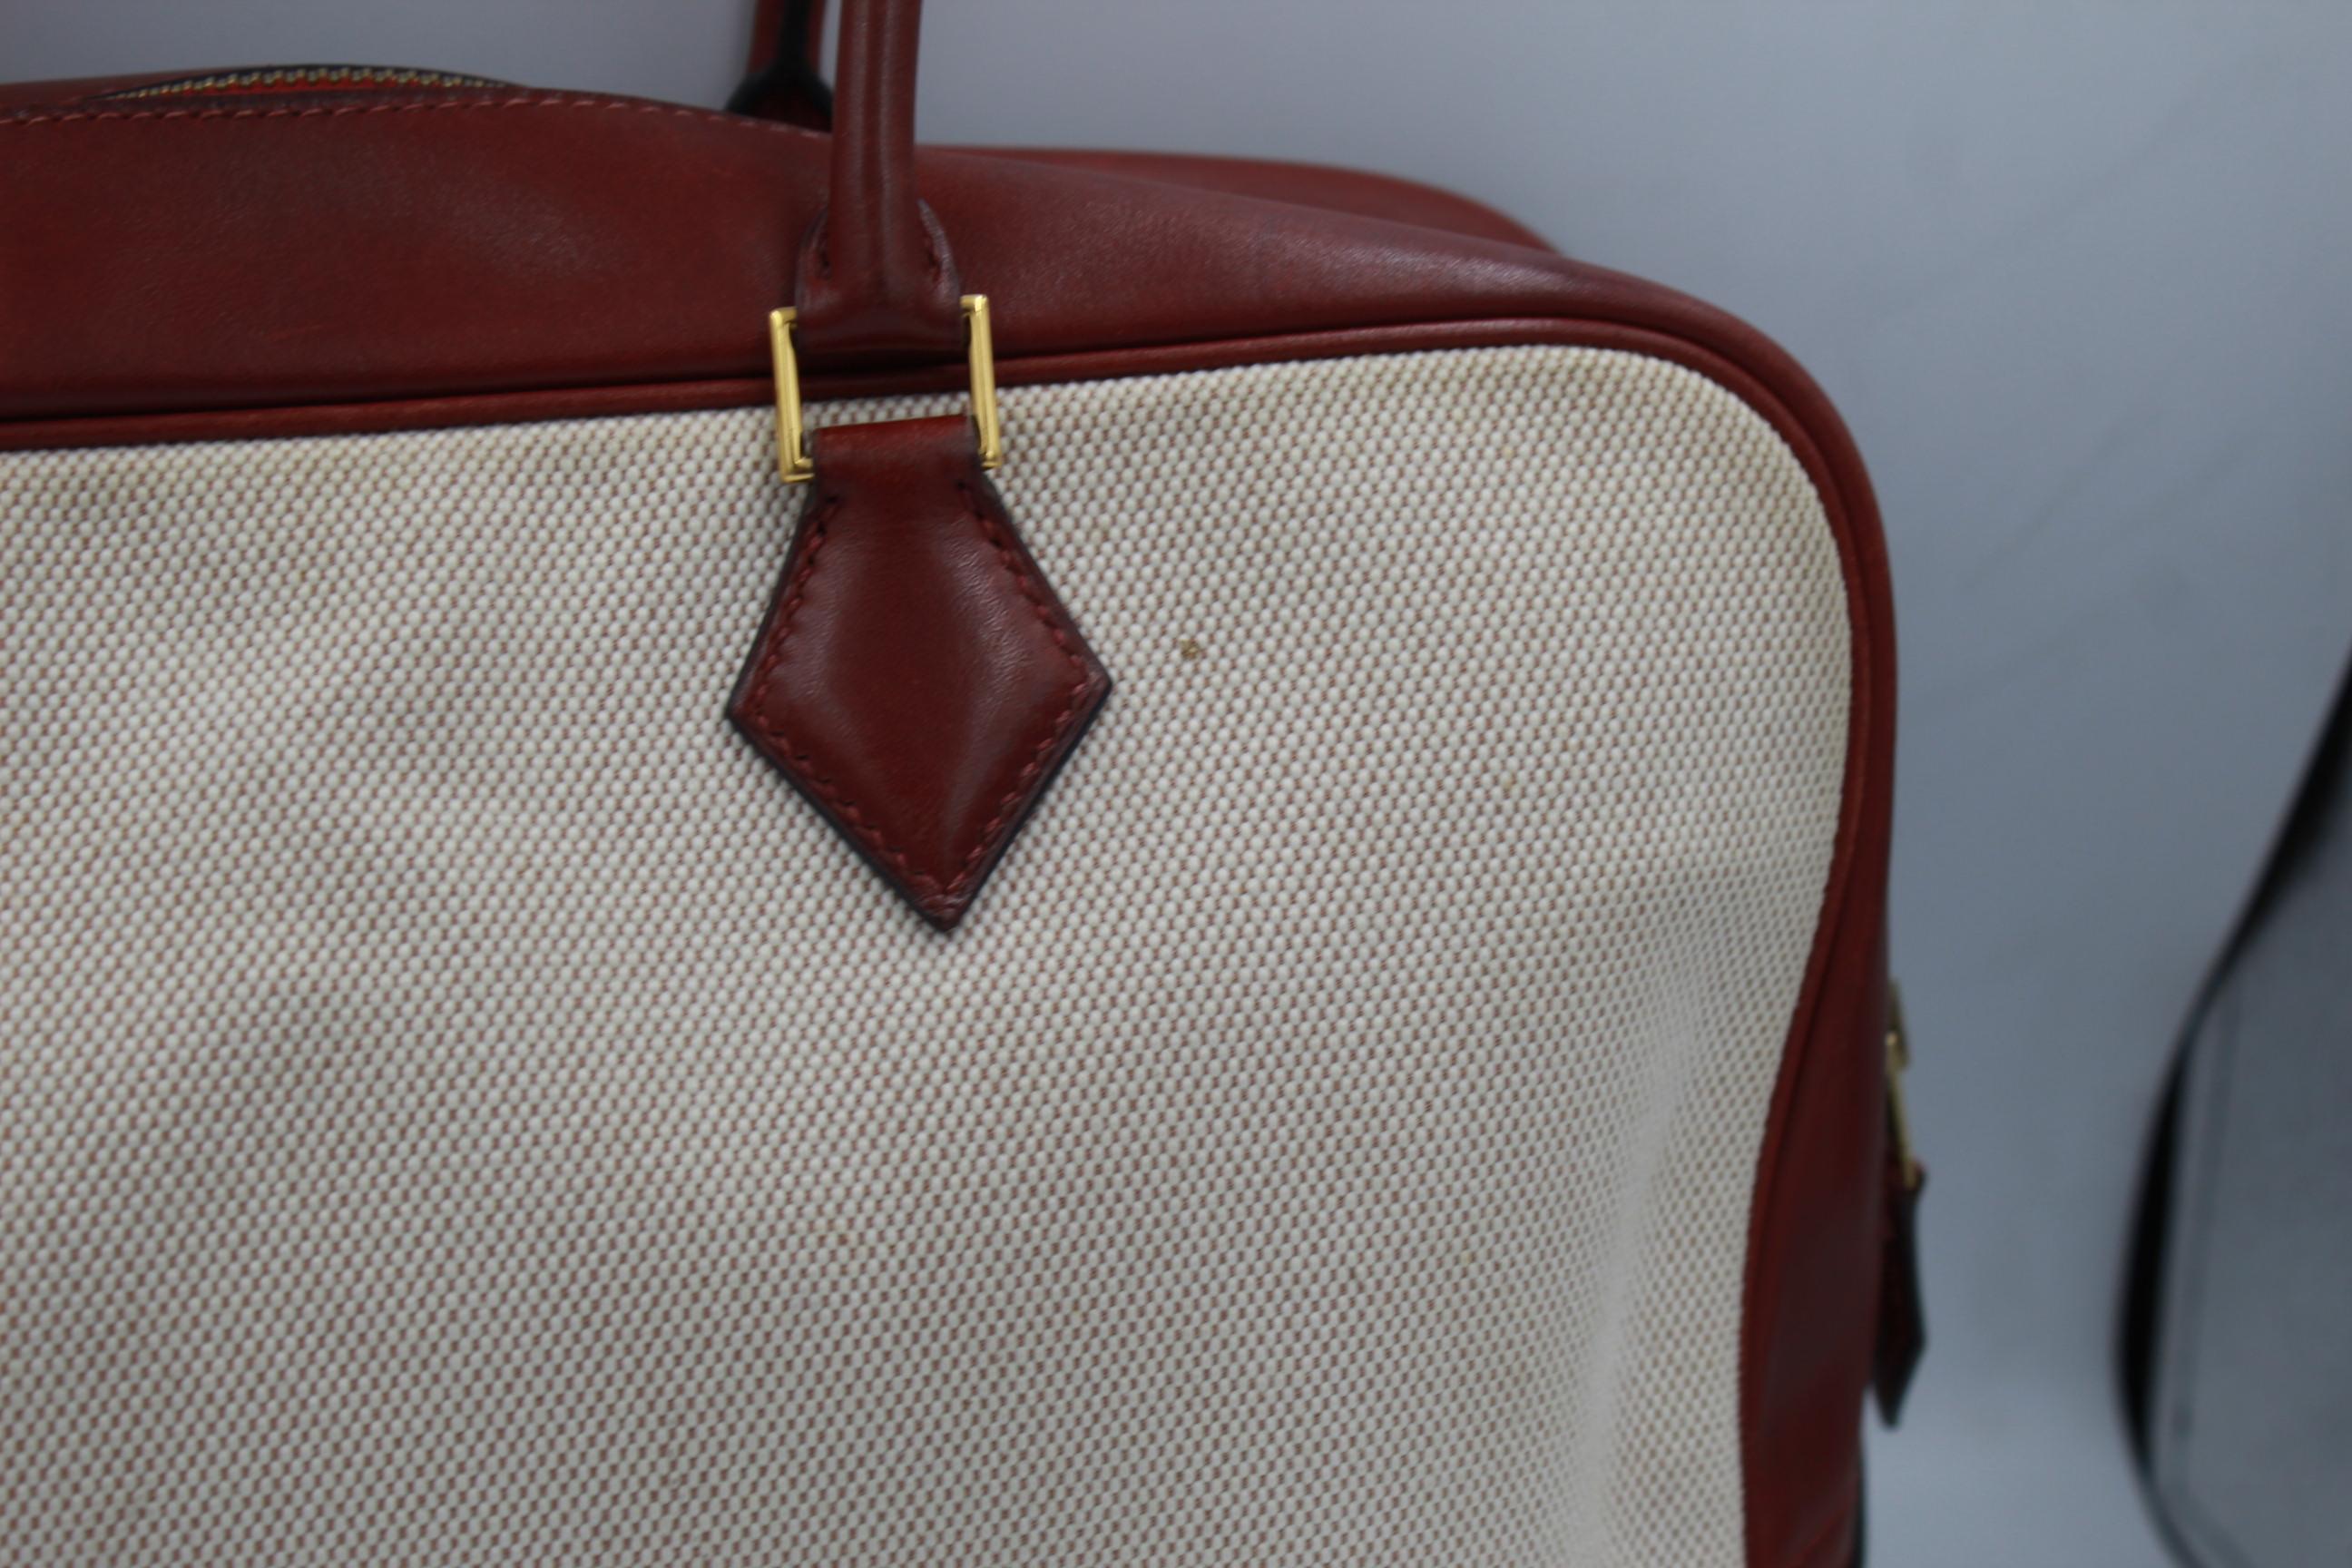 Hermes Plulme 32 bag in dark red leather and Canvas. Good condition however it presents some signs of wear:
Small stain in the canvas
Sign of wear in the bottom of the bag and corners
Interior in leather really clean
Size 32x23 cm